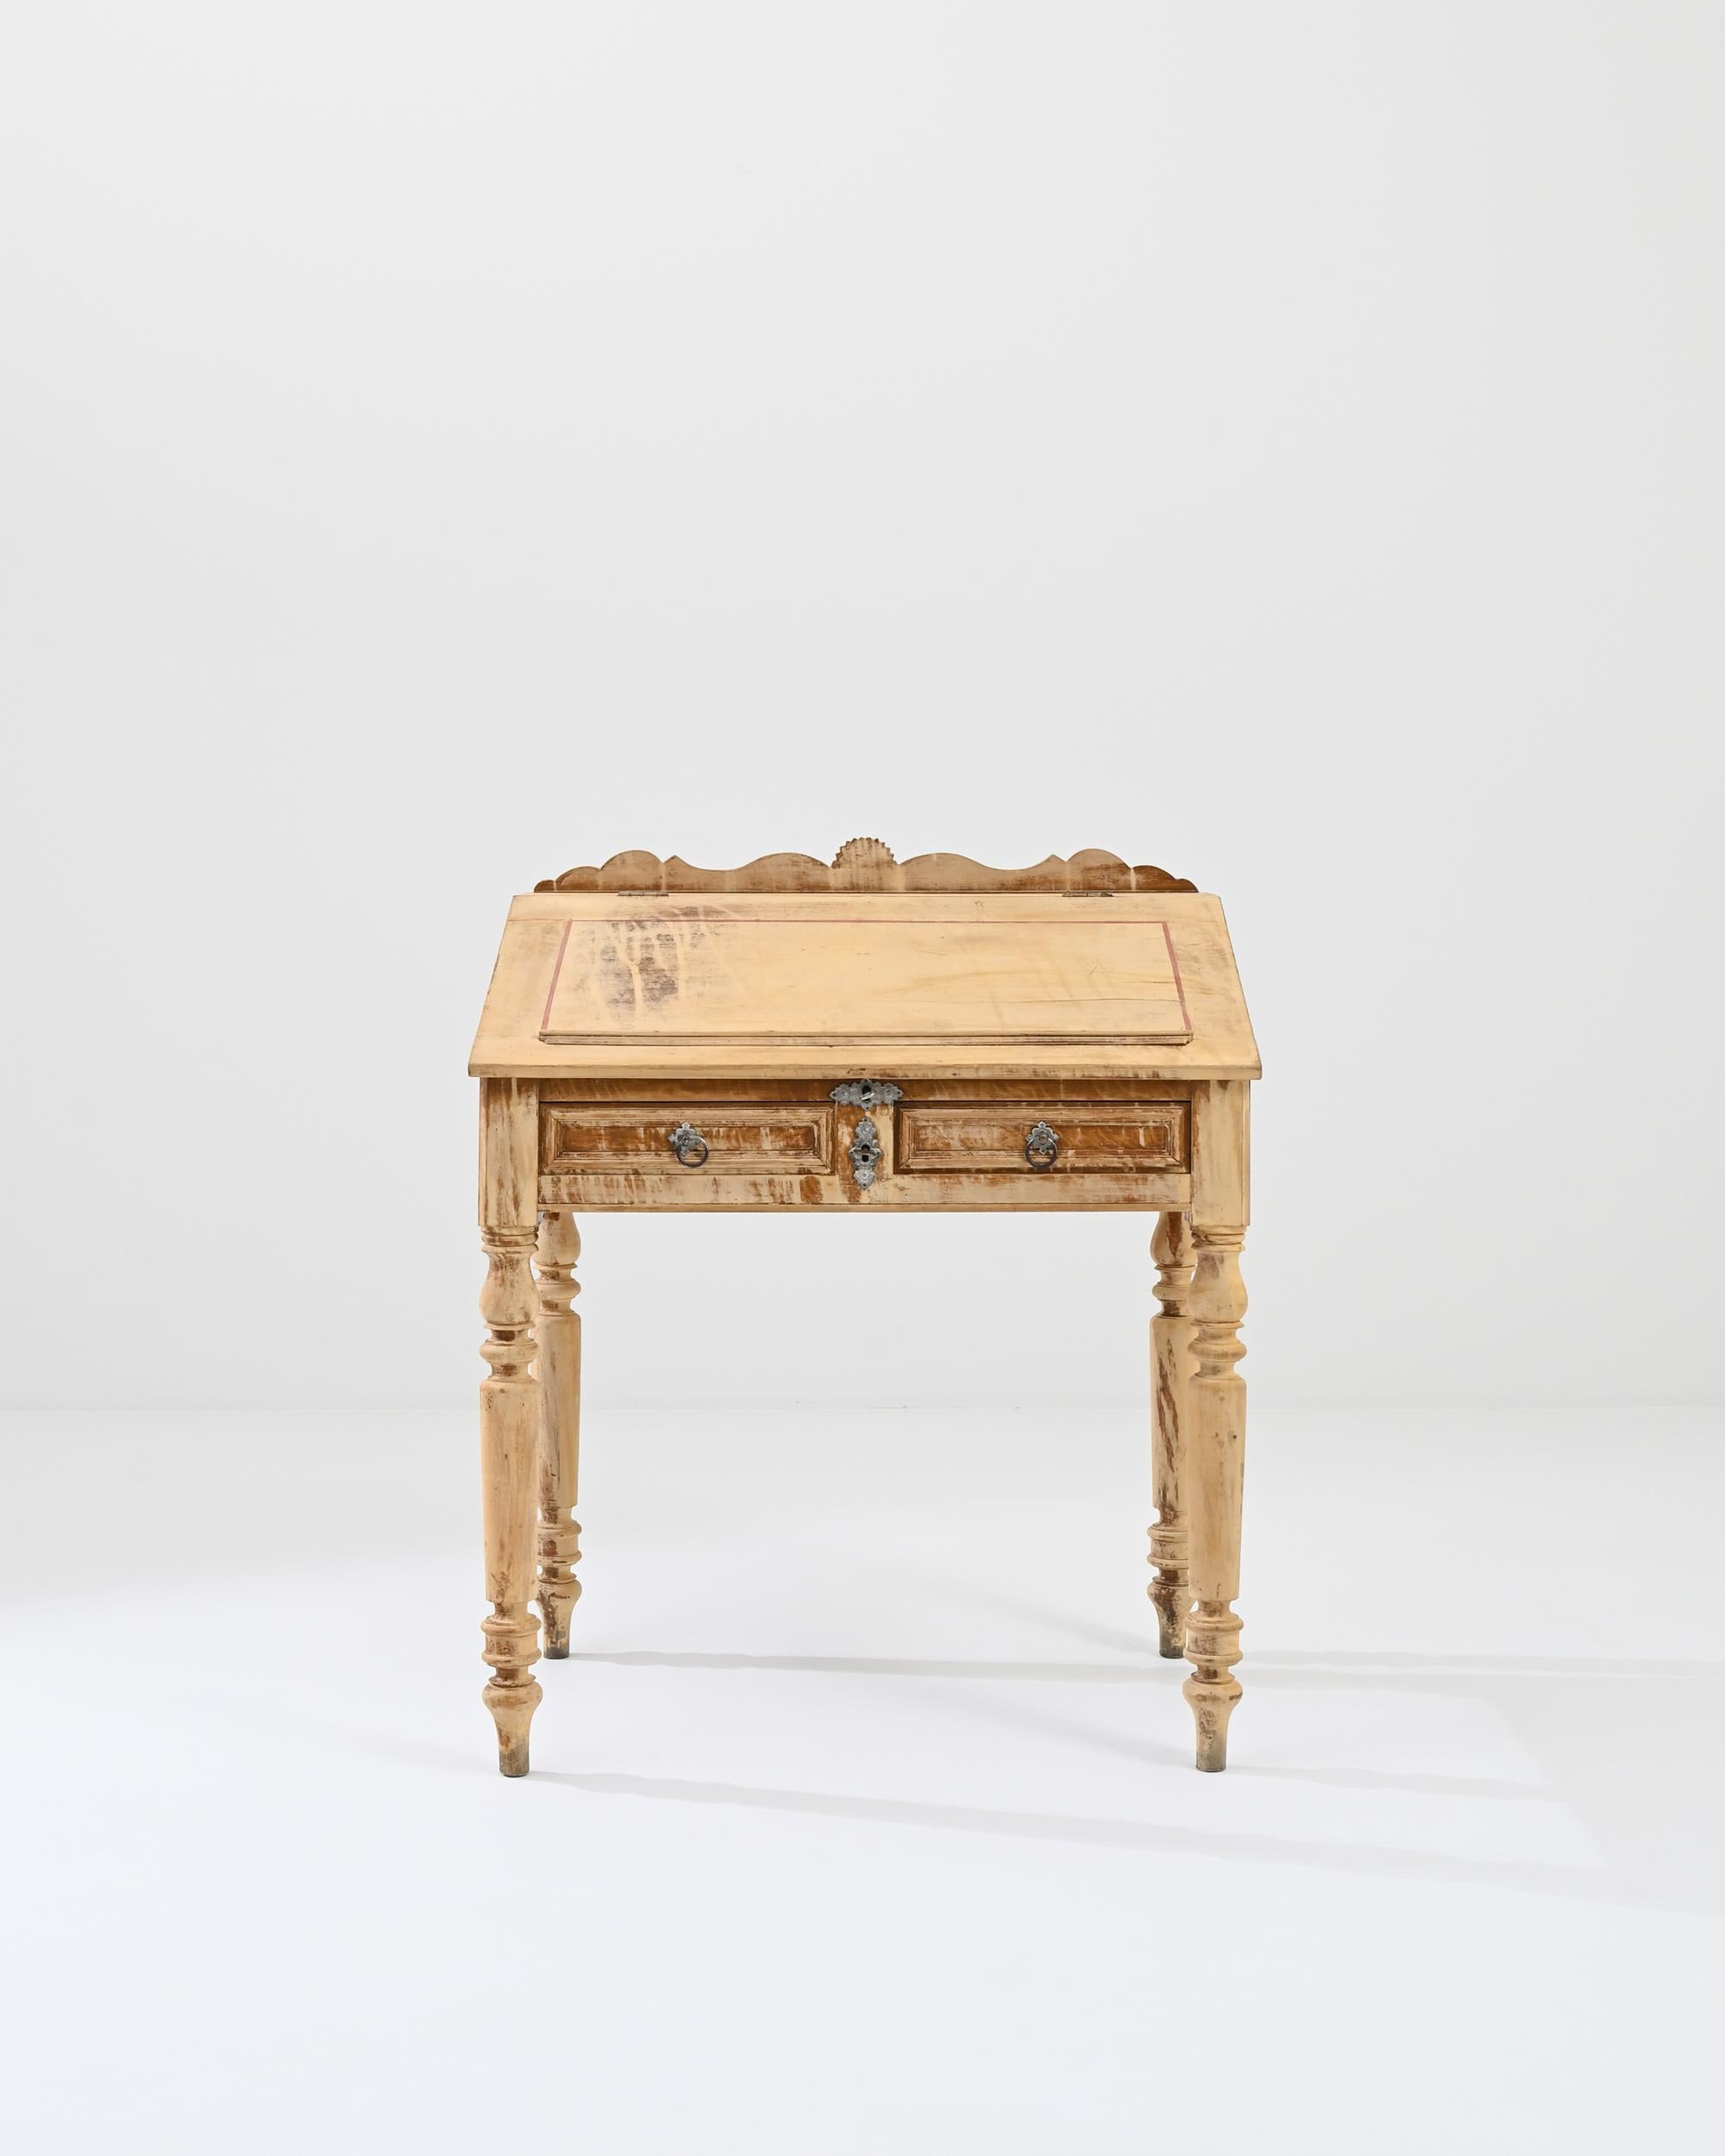 French Provincial 19th Century French Wooden Desk